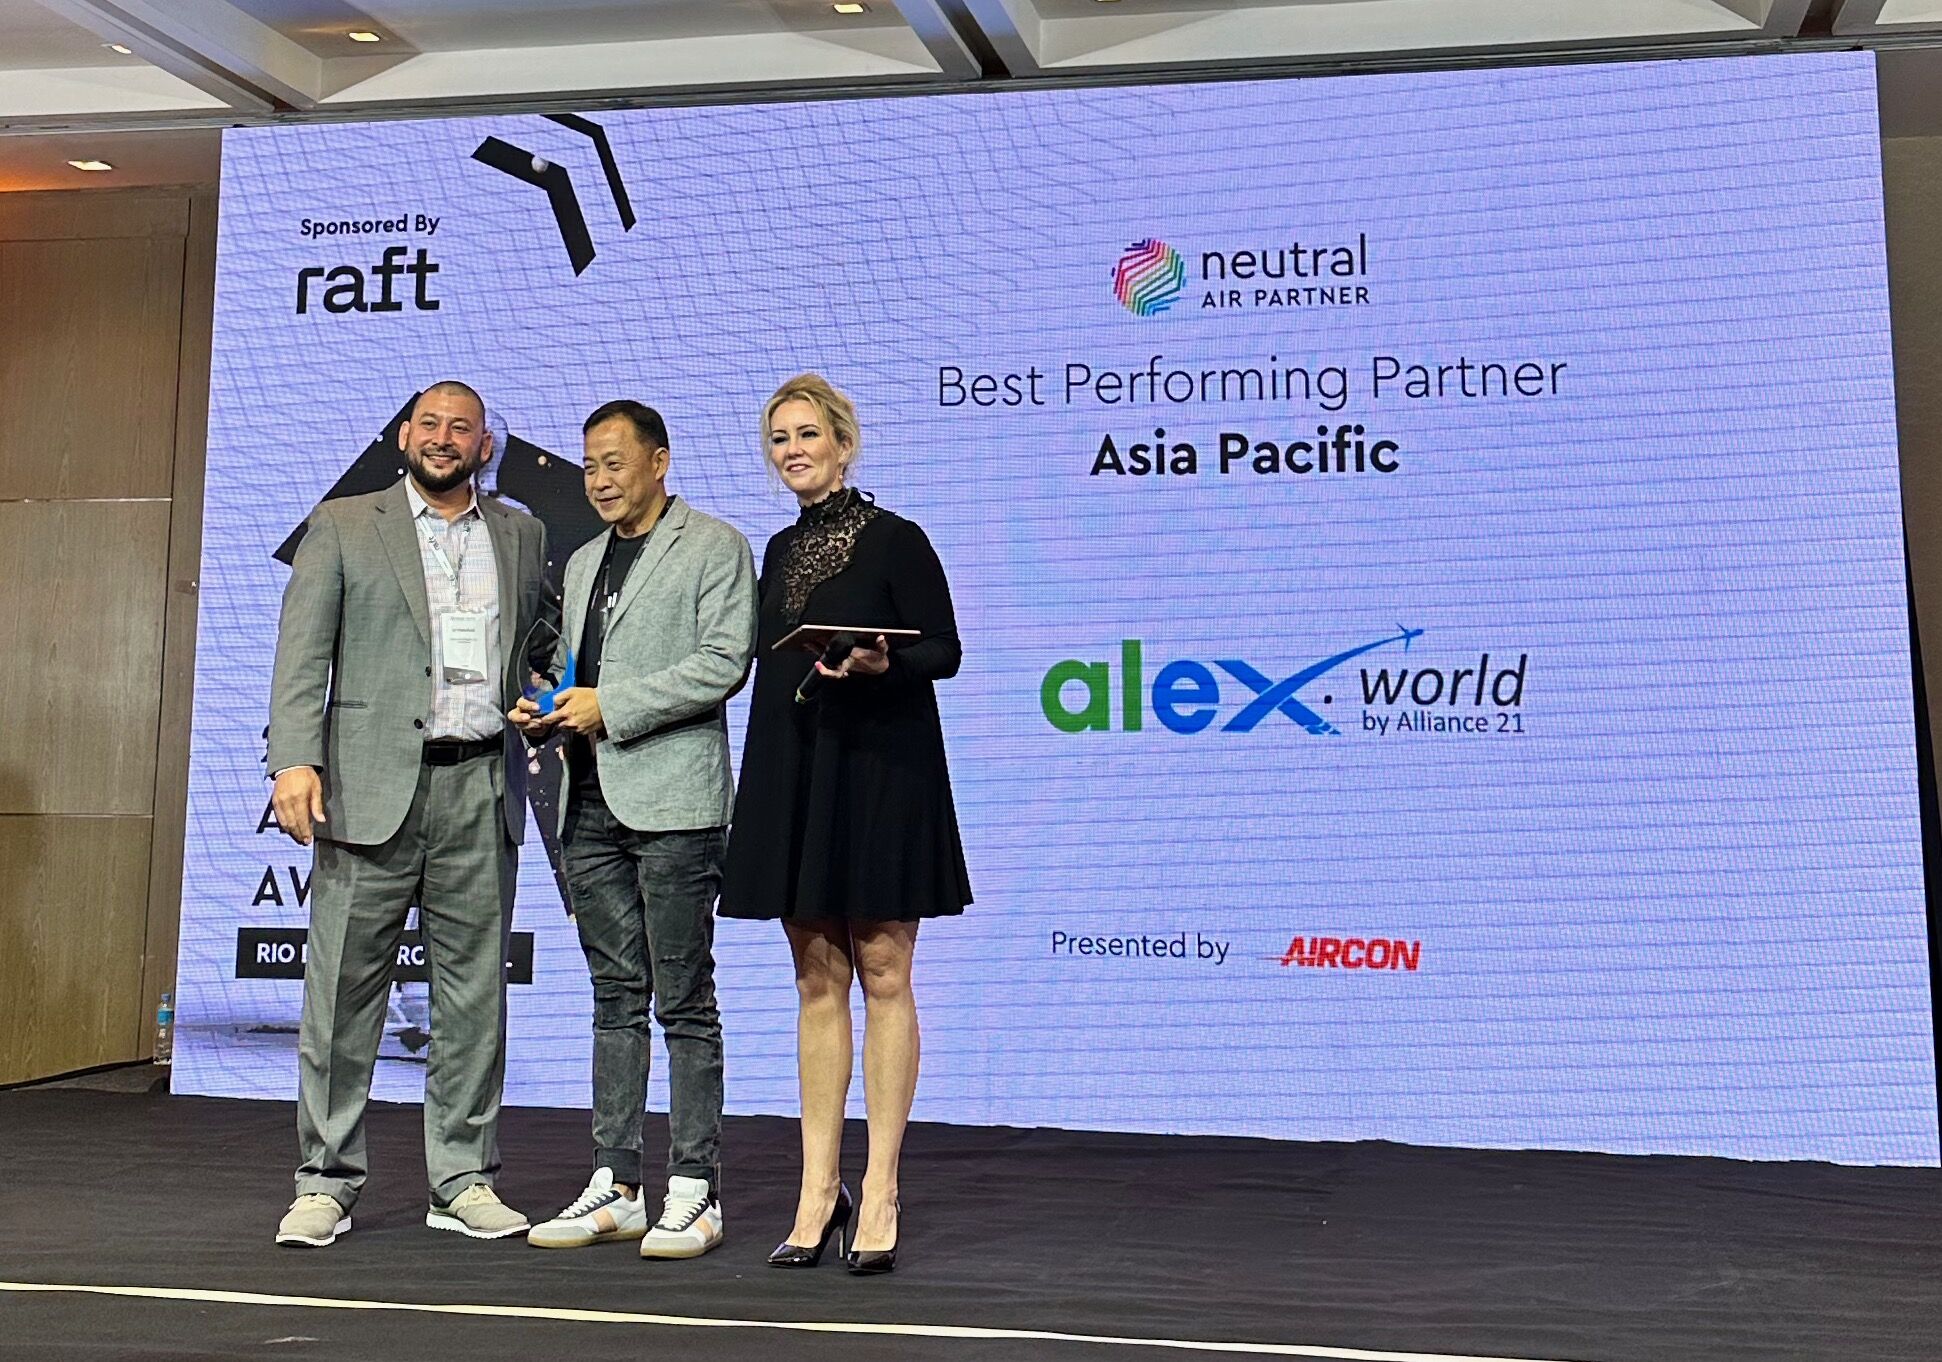 Neutral Air Partner Crowns Alliance 21 Best-Performing Partner in Asia Pacific